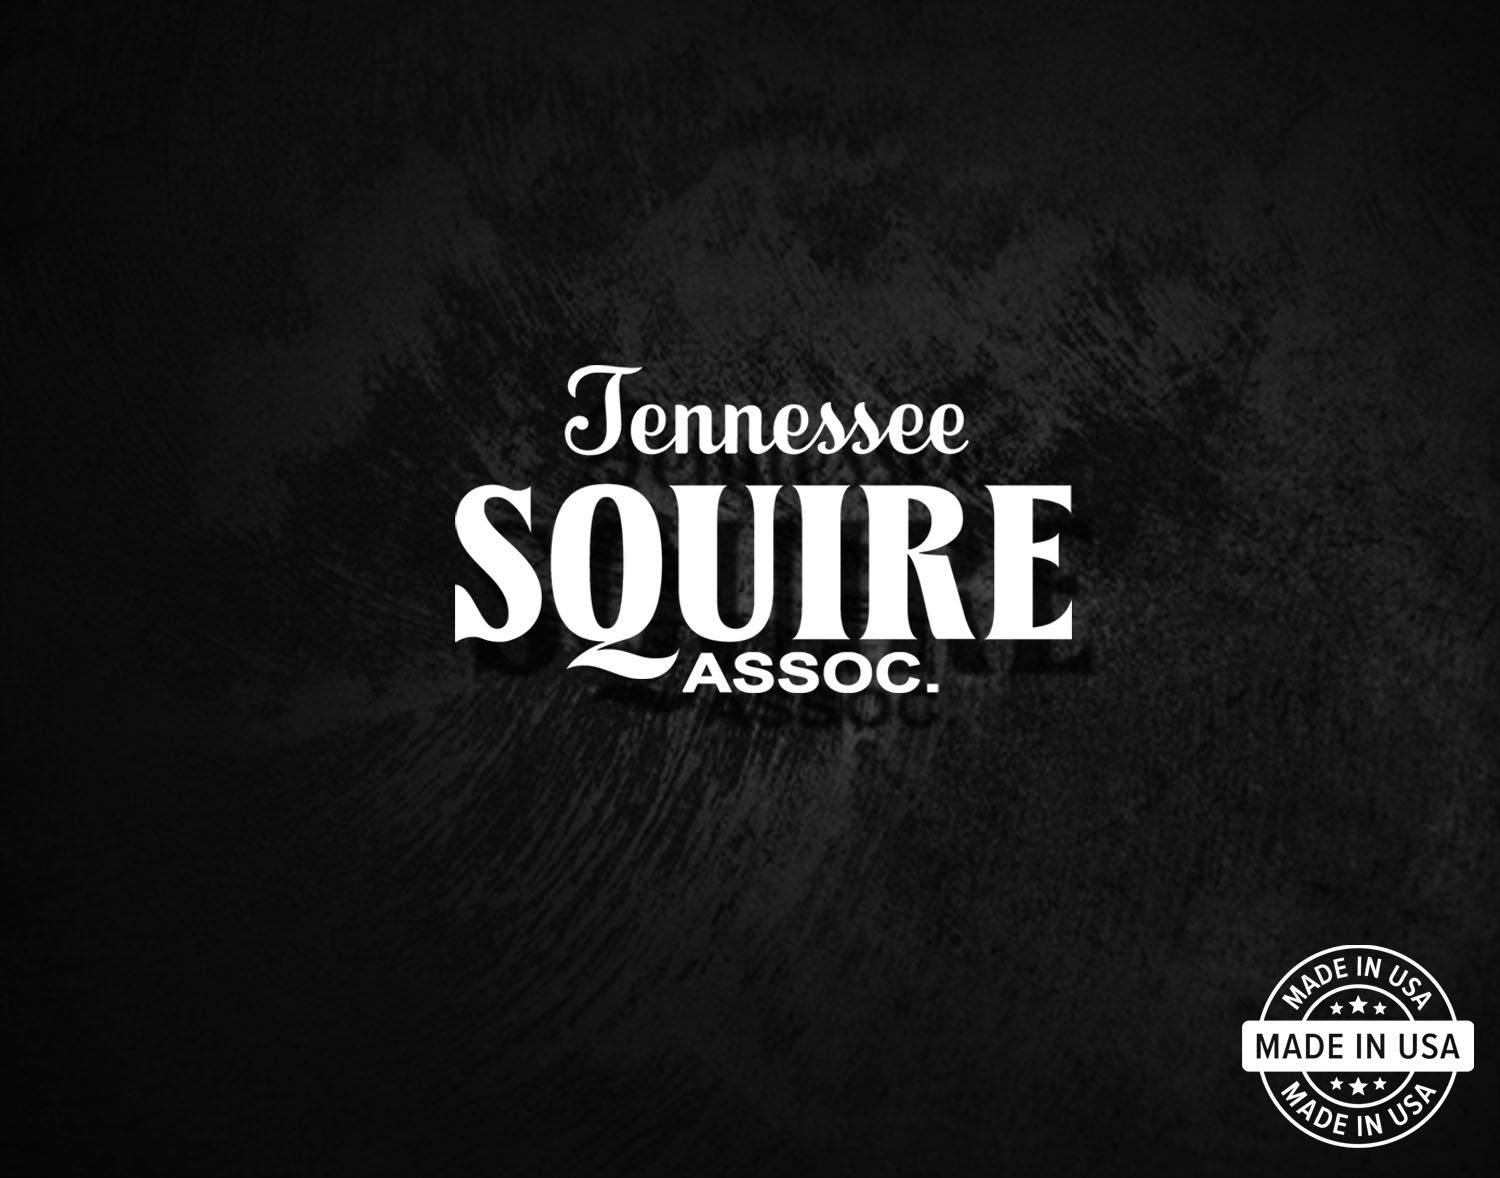 Jack Daniel's Tennessee Squire Association Decal